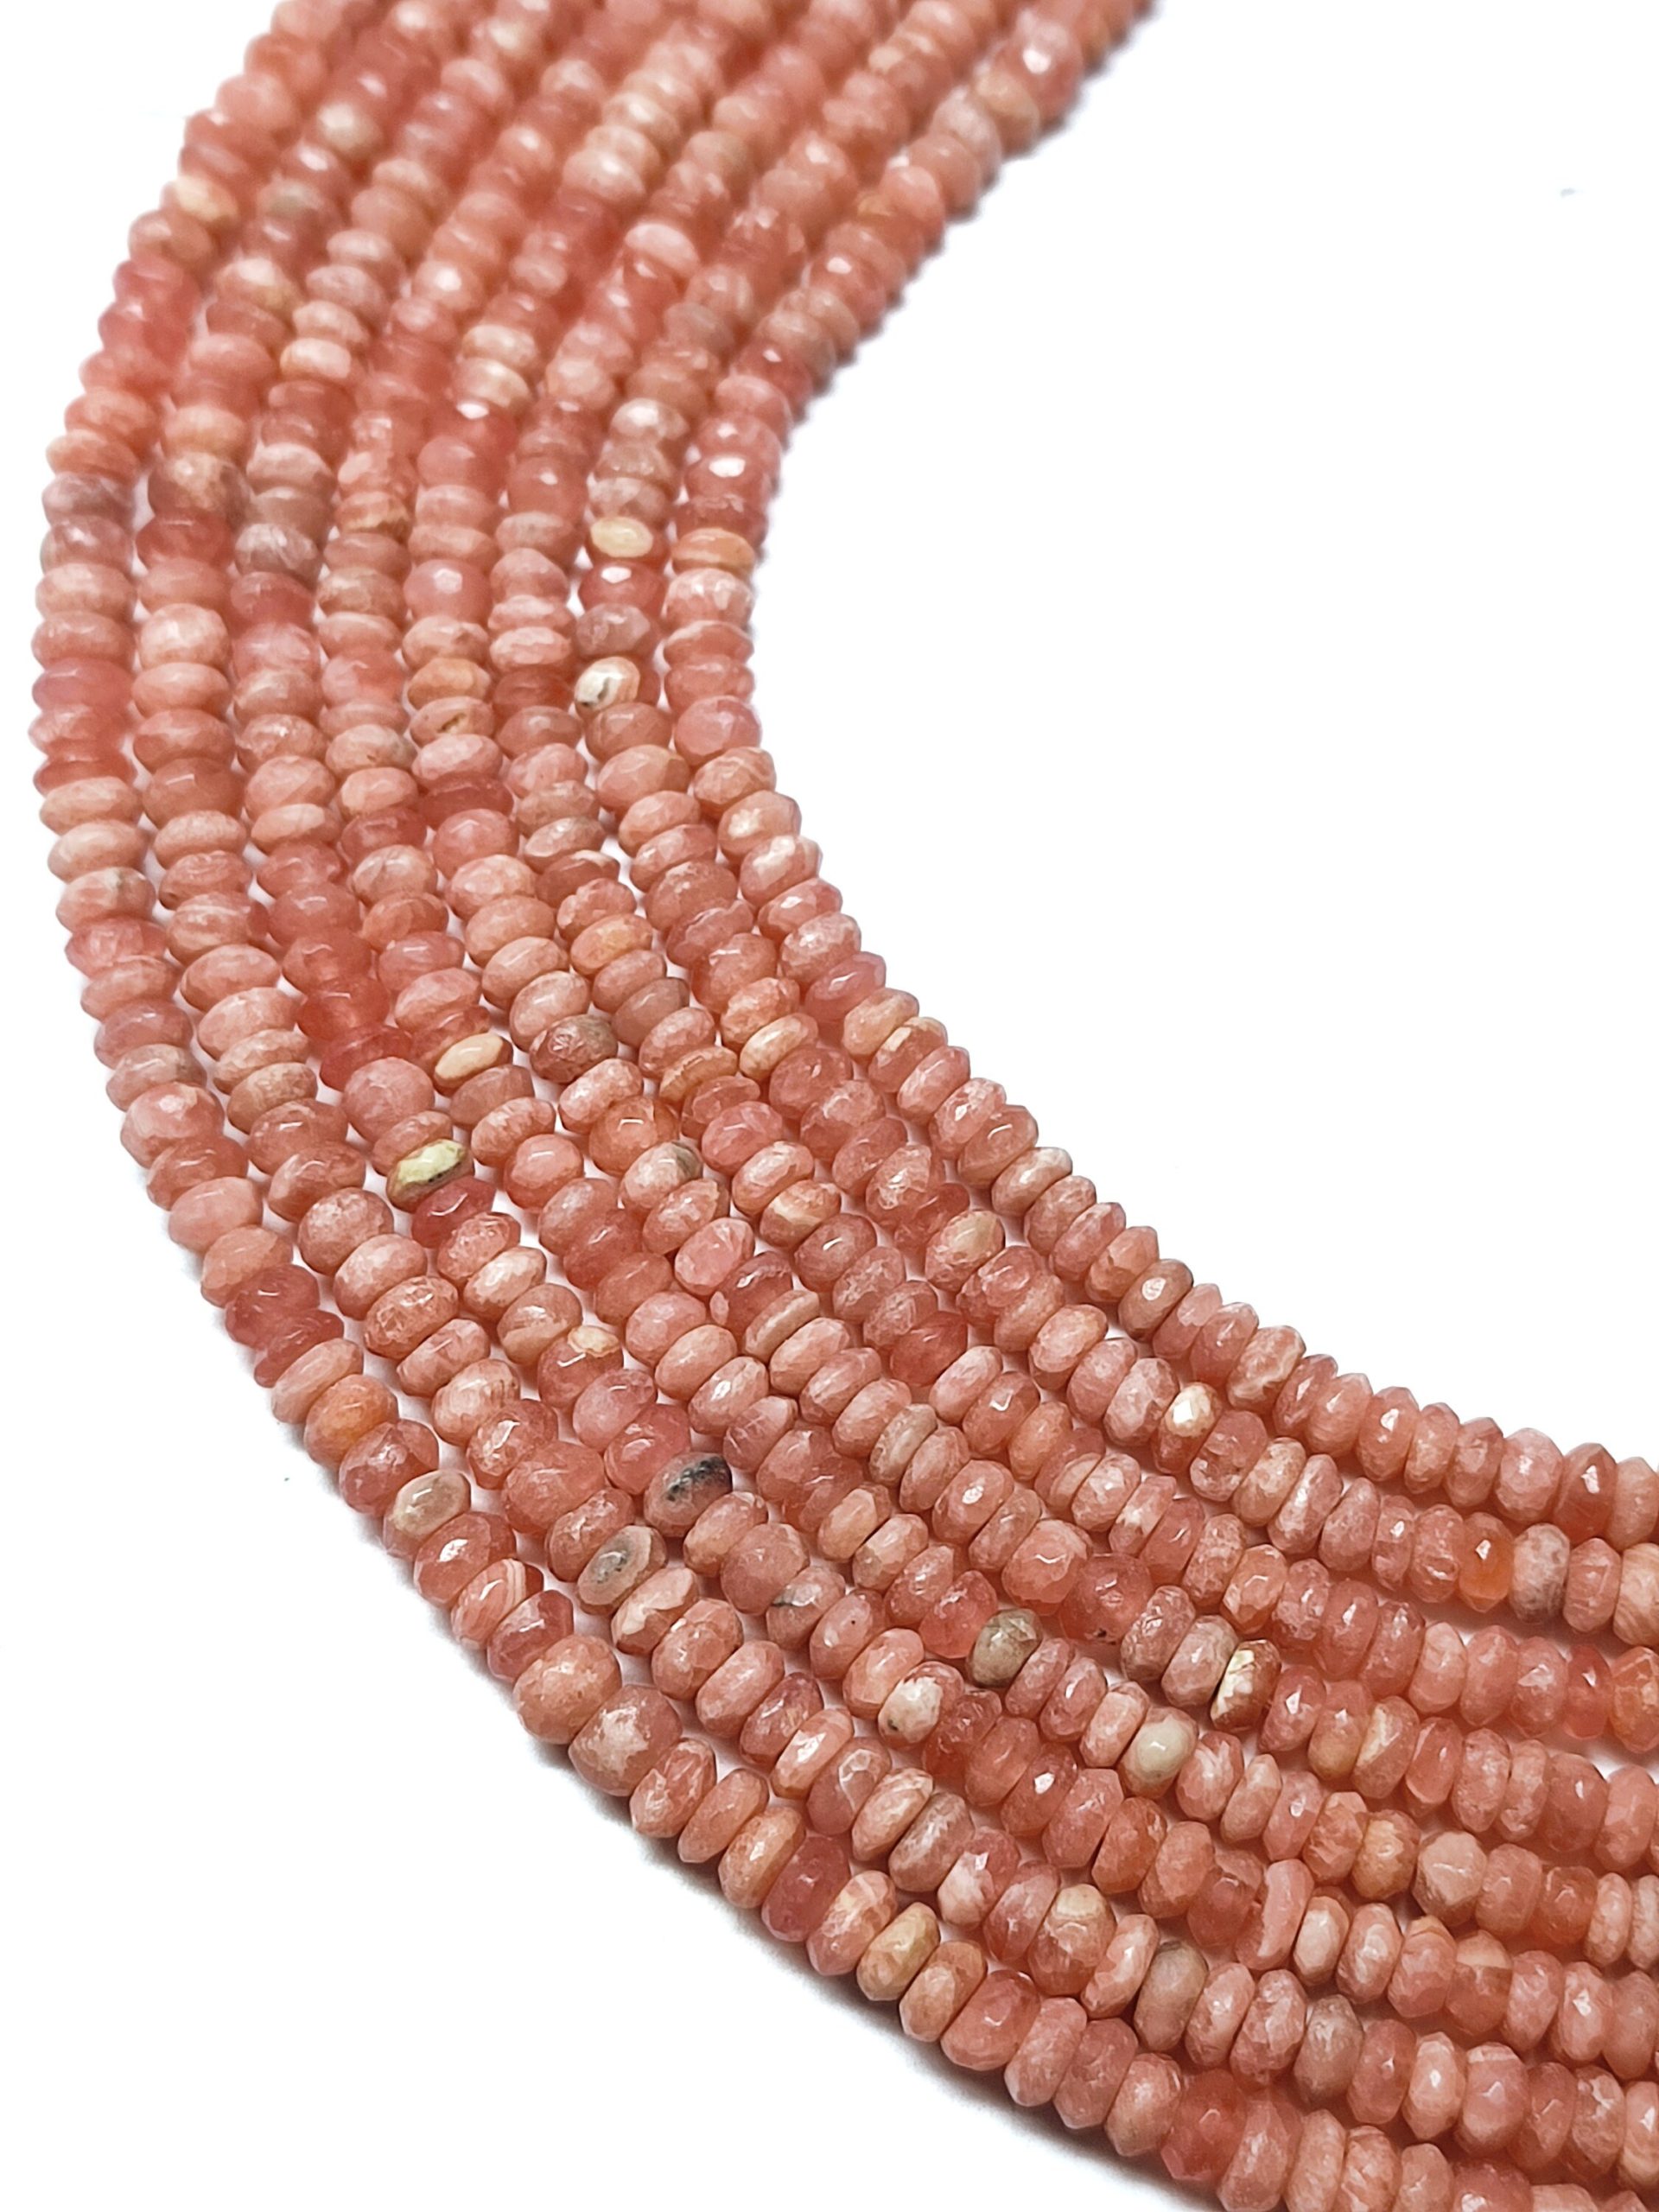 Beautifull Aaa 4.5 To 5 Mm Micro Rhodochrosite Shaded Rondelle Beads, 13 Inches Strand Length,super Quality Gems For Jewellery